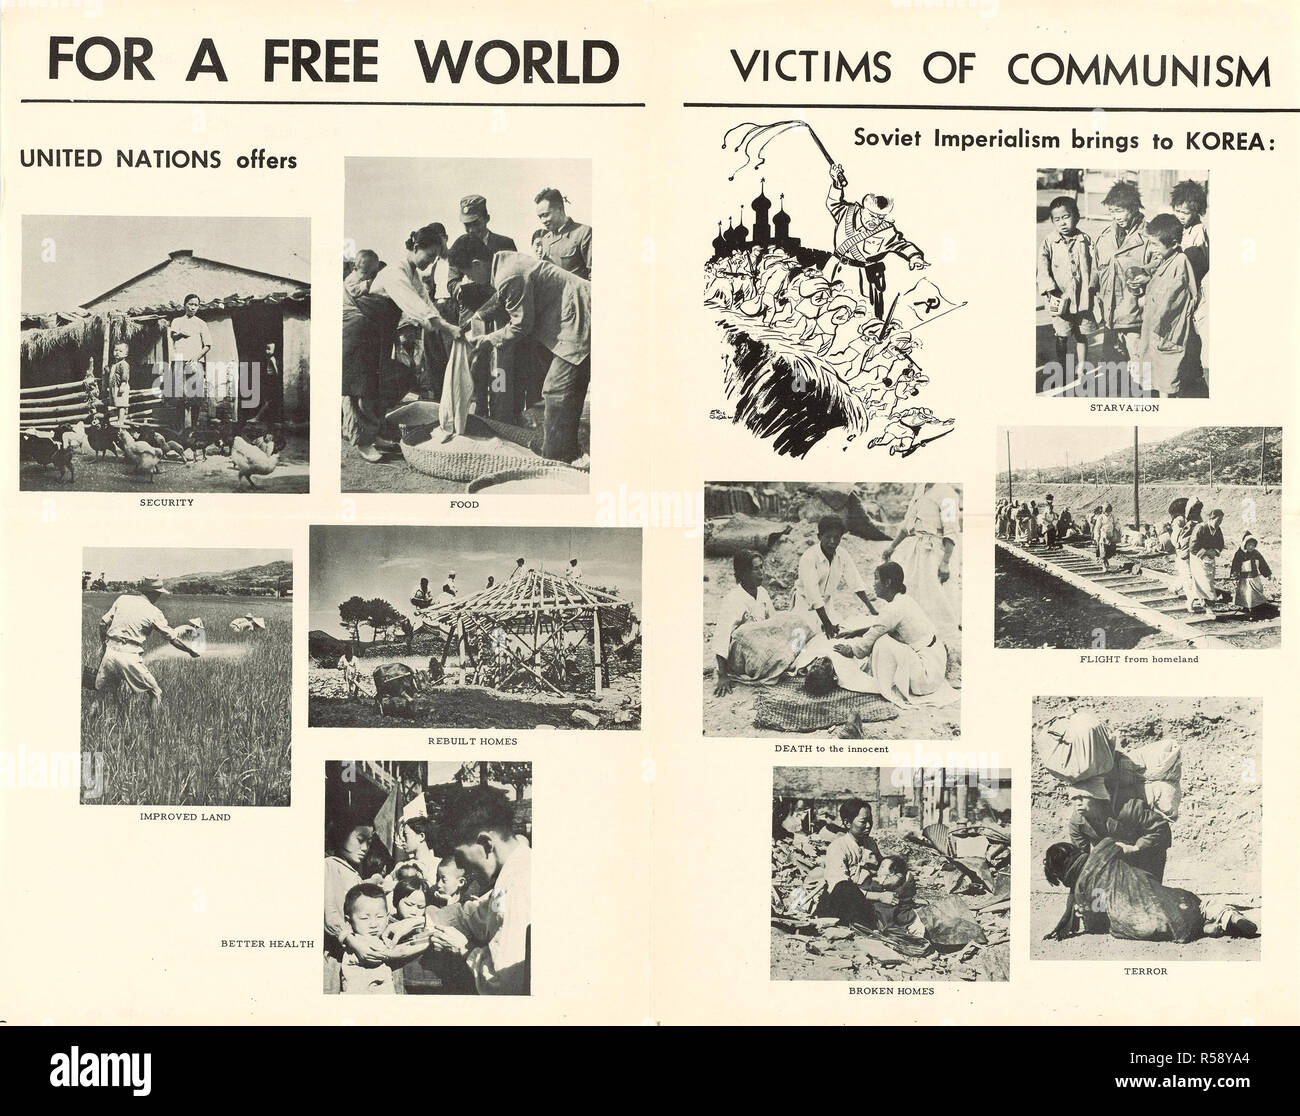 9/12/1951 - U.S. Propaganda Posters in 1950s Asia - For a Free World and Victims of Communism Poster Stock Photo